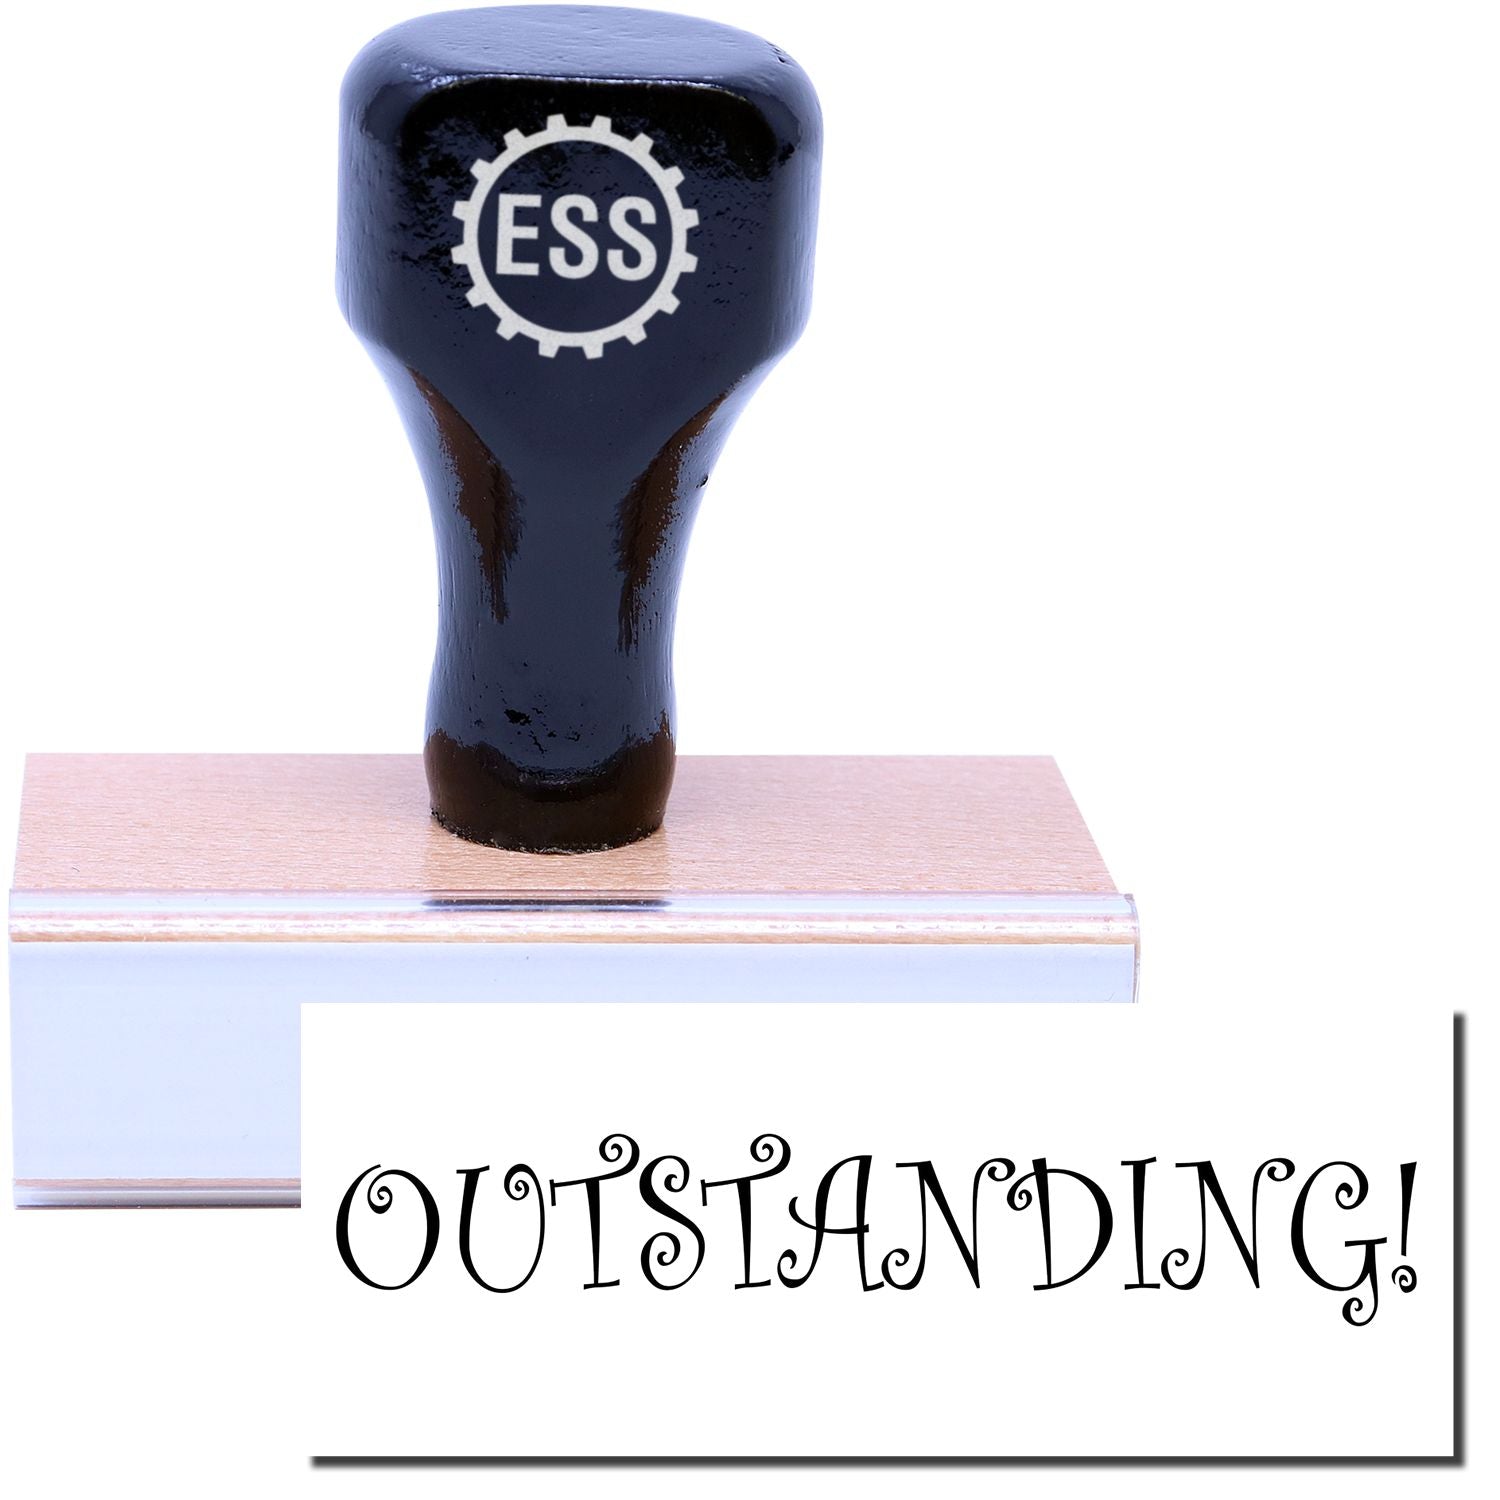 A stock office rubber stamp with a stamped image showing how the text "OUTSTANDING!" in a large font is displayed after stamping.